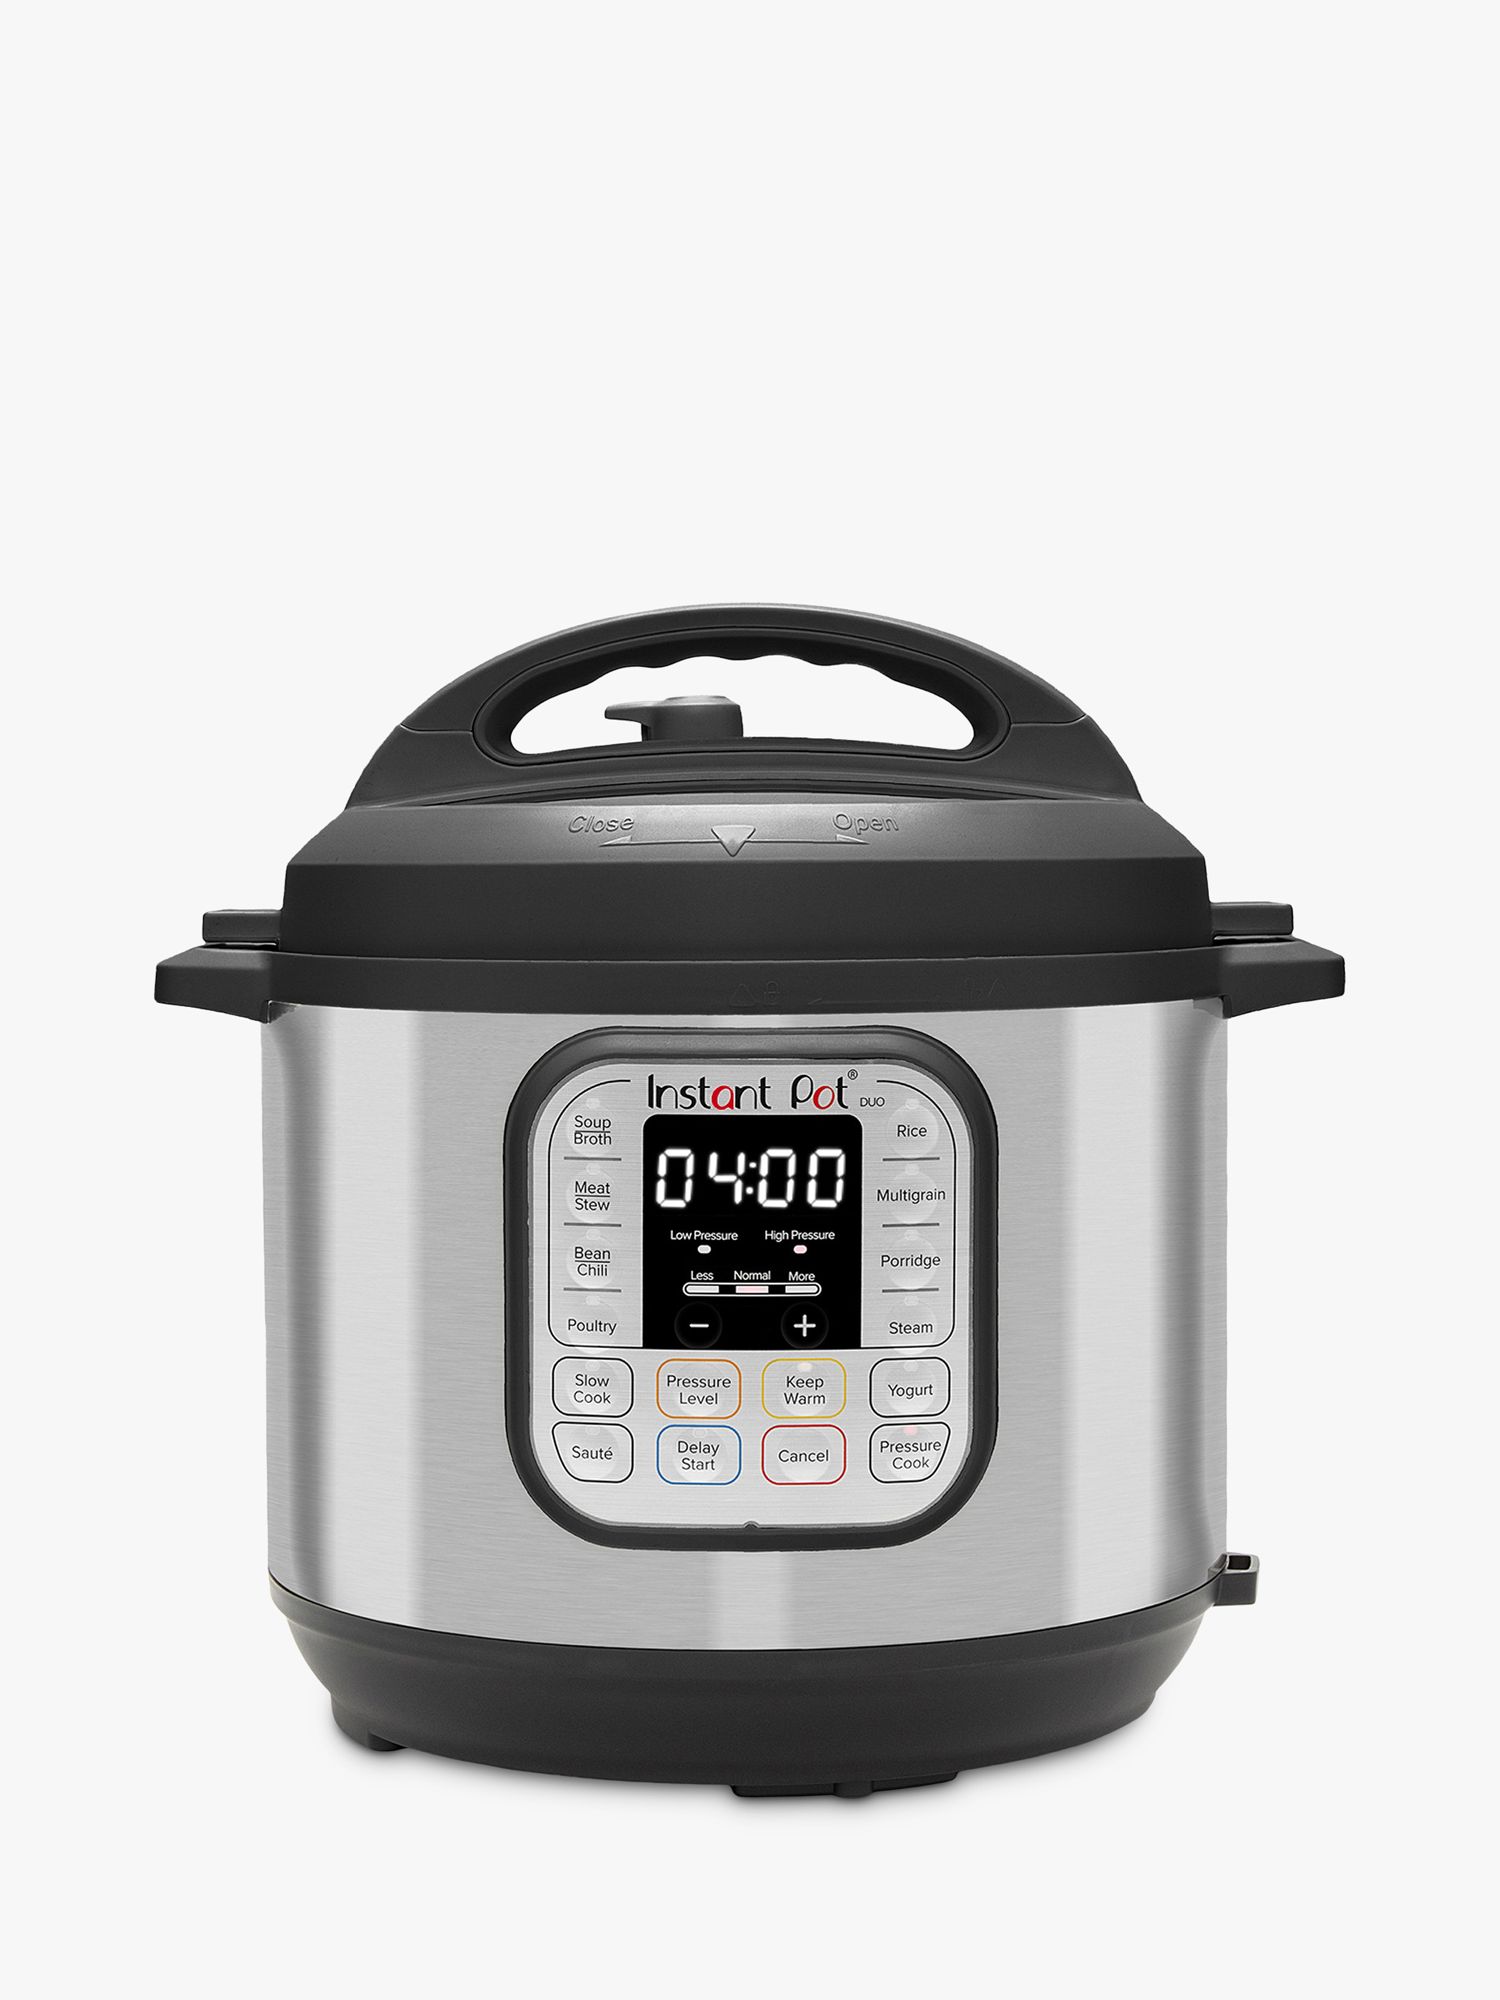 Instant Pot Duo Plus 9-in-1 Electric Pressure Cooker, Slow Cooker, Ric